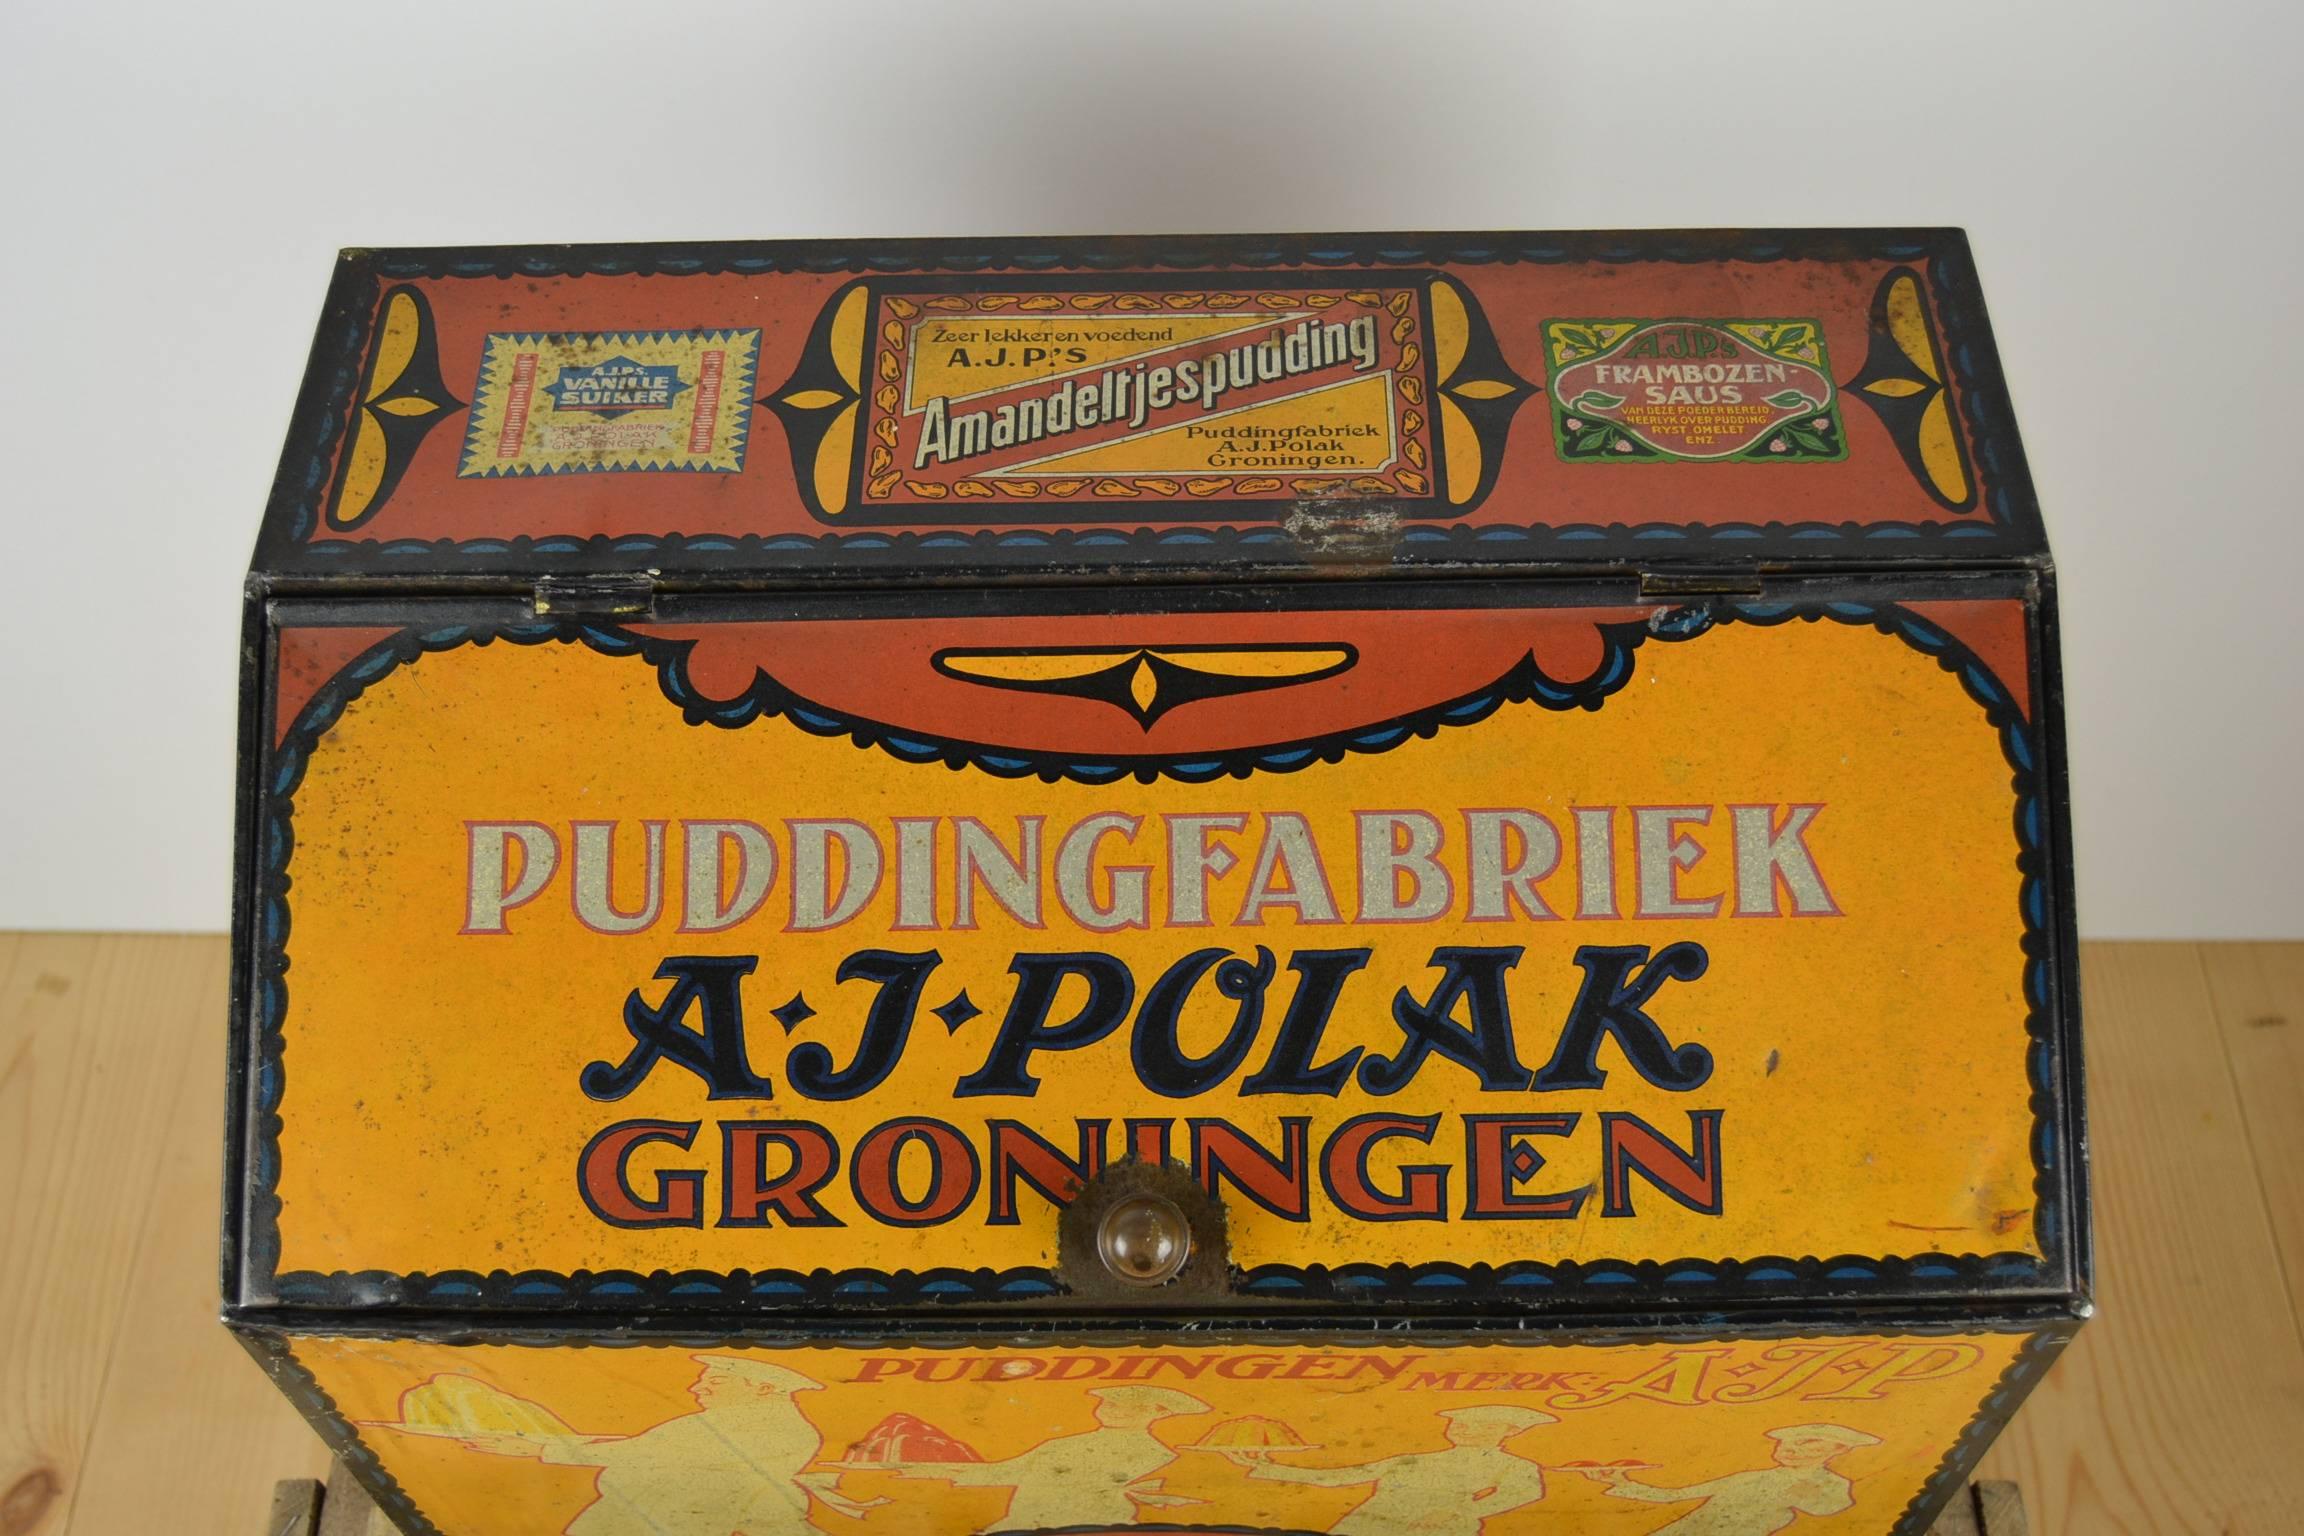 Lovely lithographic tin grocery storage box container for pudding powder.
For the pudding company A.J.Polak, Groningen, Holland in the early 20th century.

Beautiful shape with awesome drawings like chefs presenting the pudding they made and